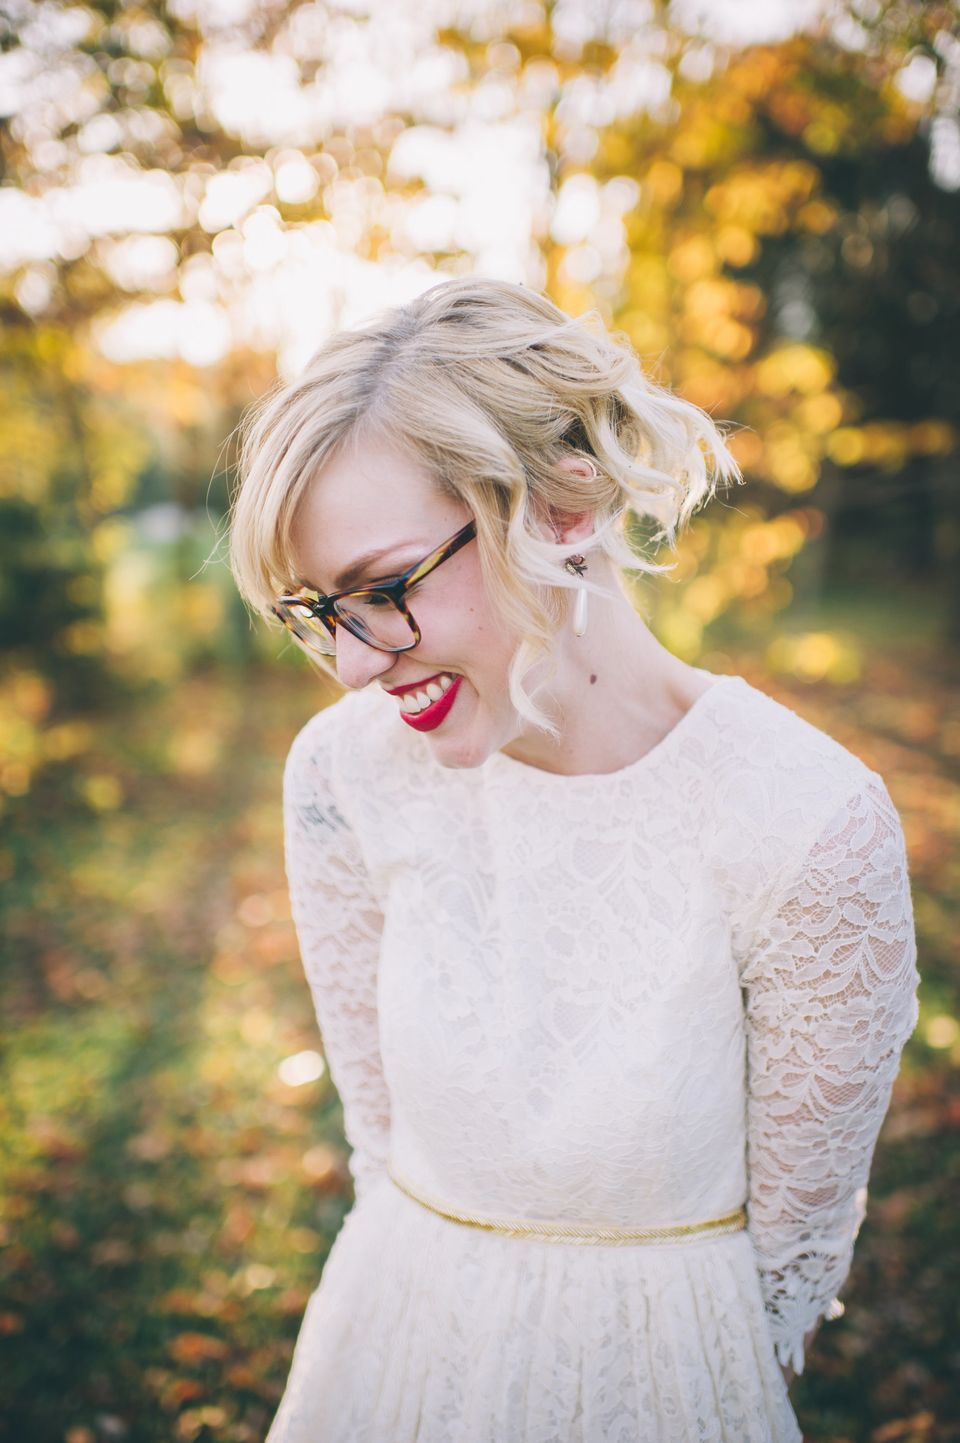 12 Bespectacled Brides Who Rocked Glasses At Their Weddings | HuffPost Life